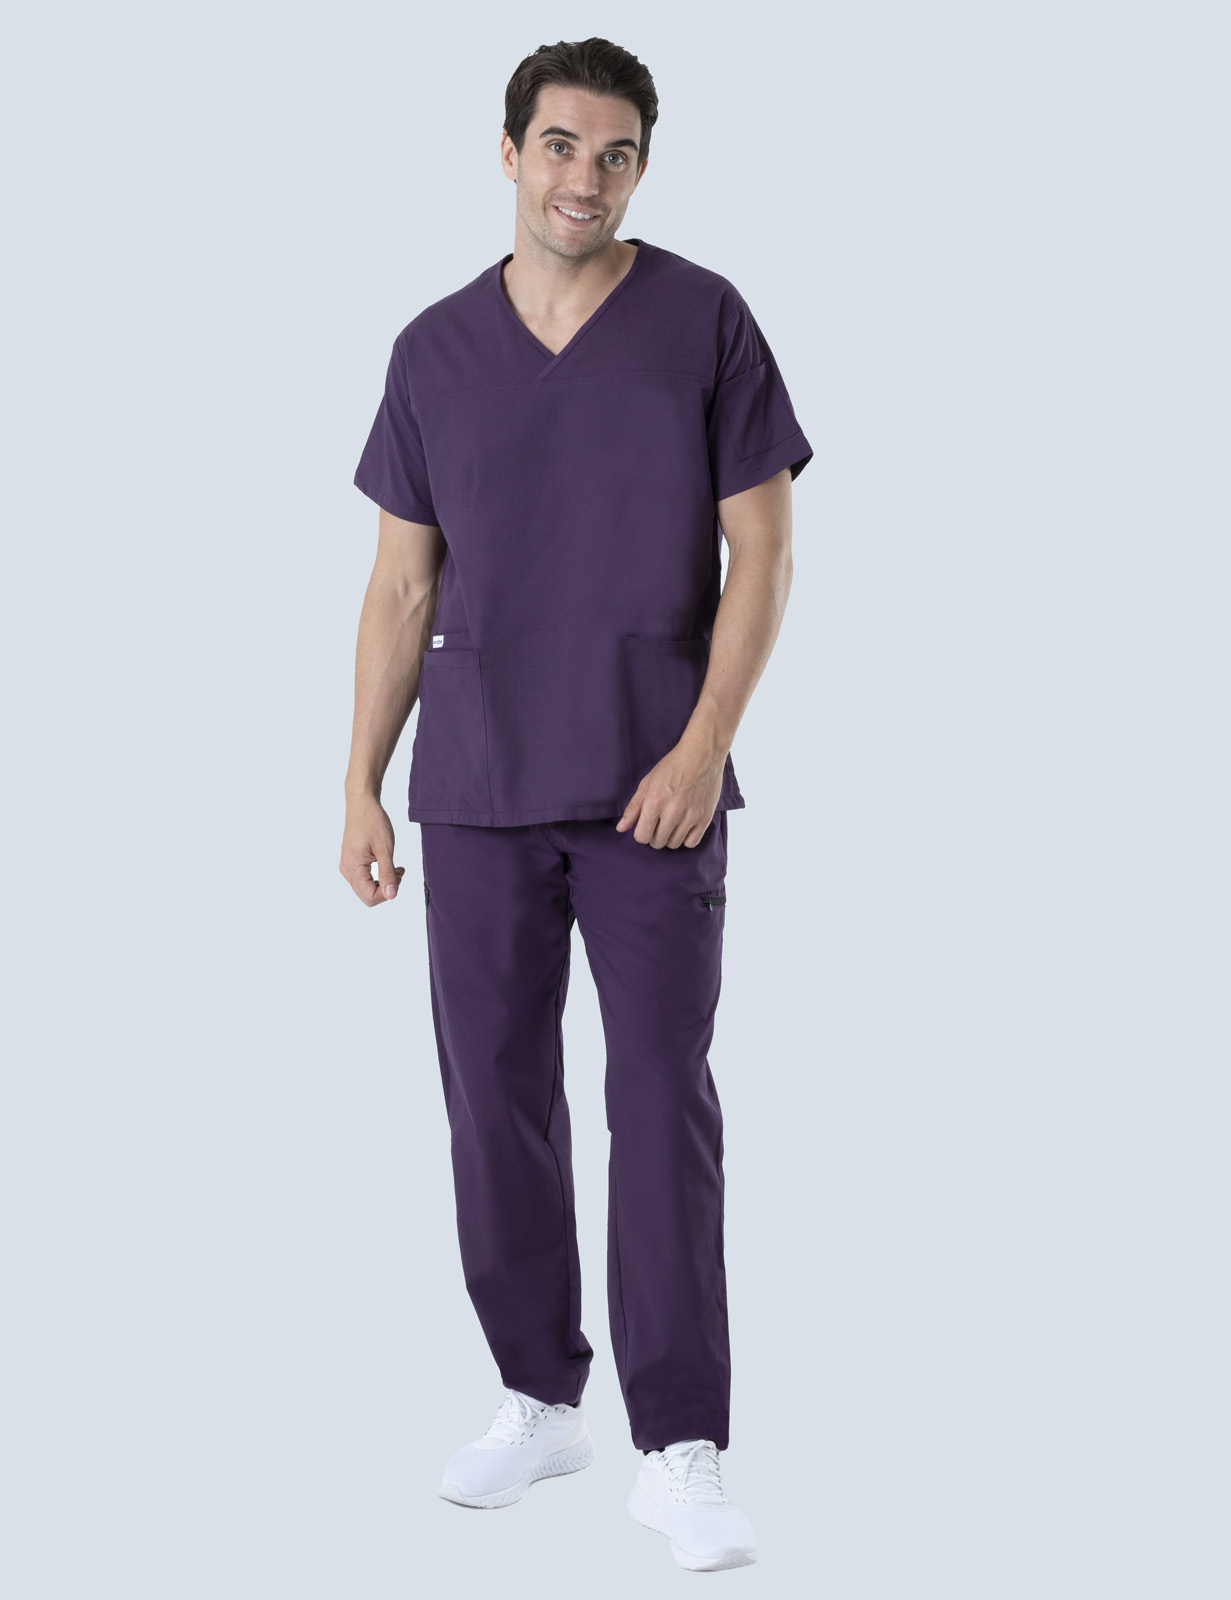 Gladstone Hospital - HDU Renal (Men's Fit Top and Cargo Pants in Aubergine incl Logos)